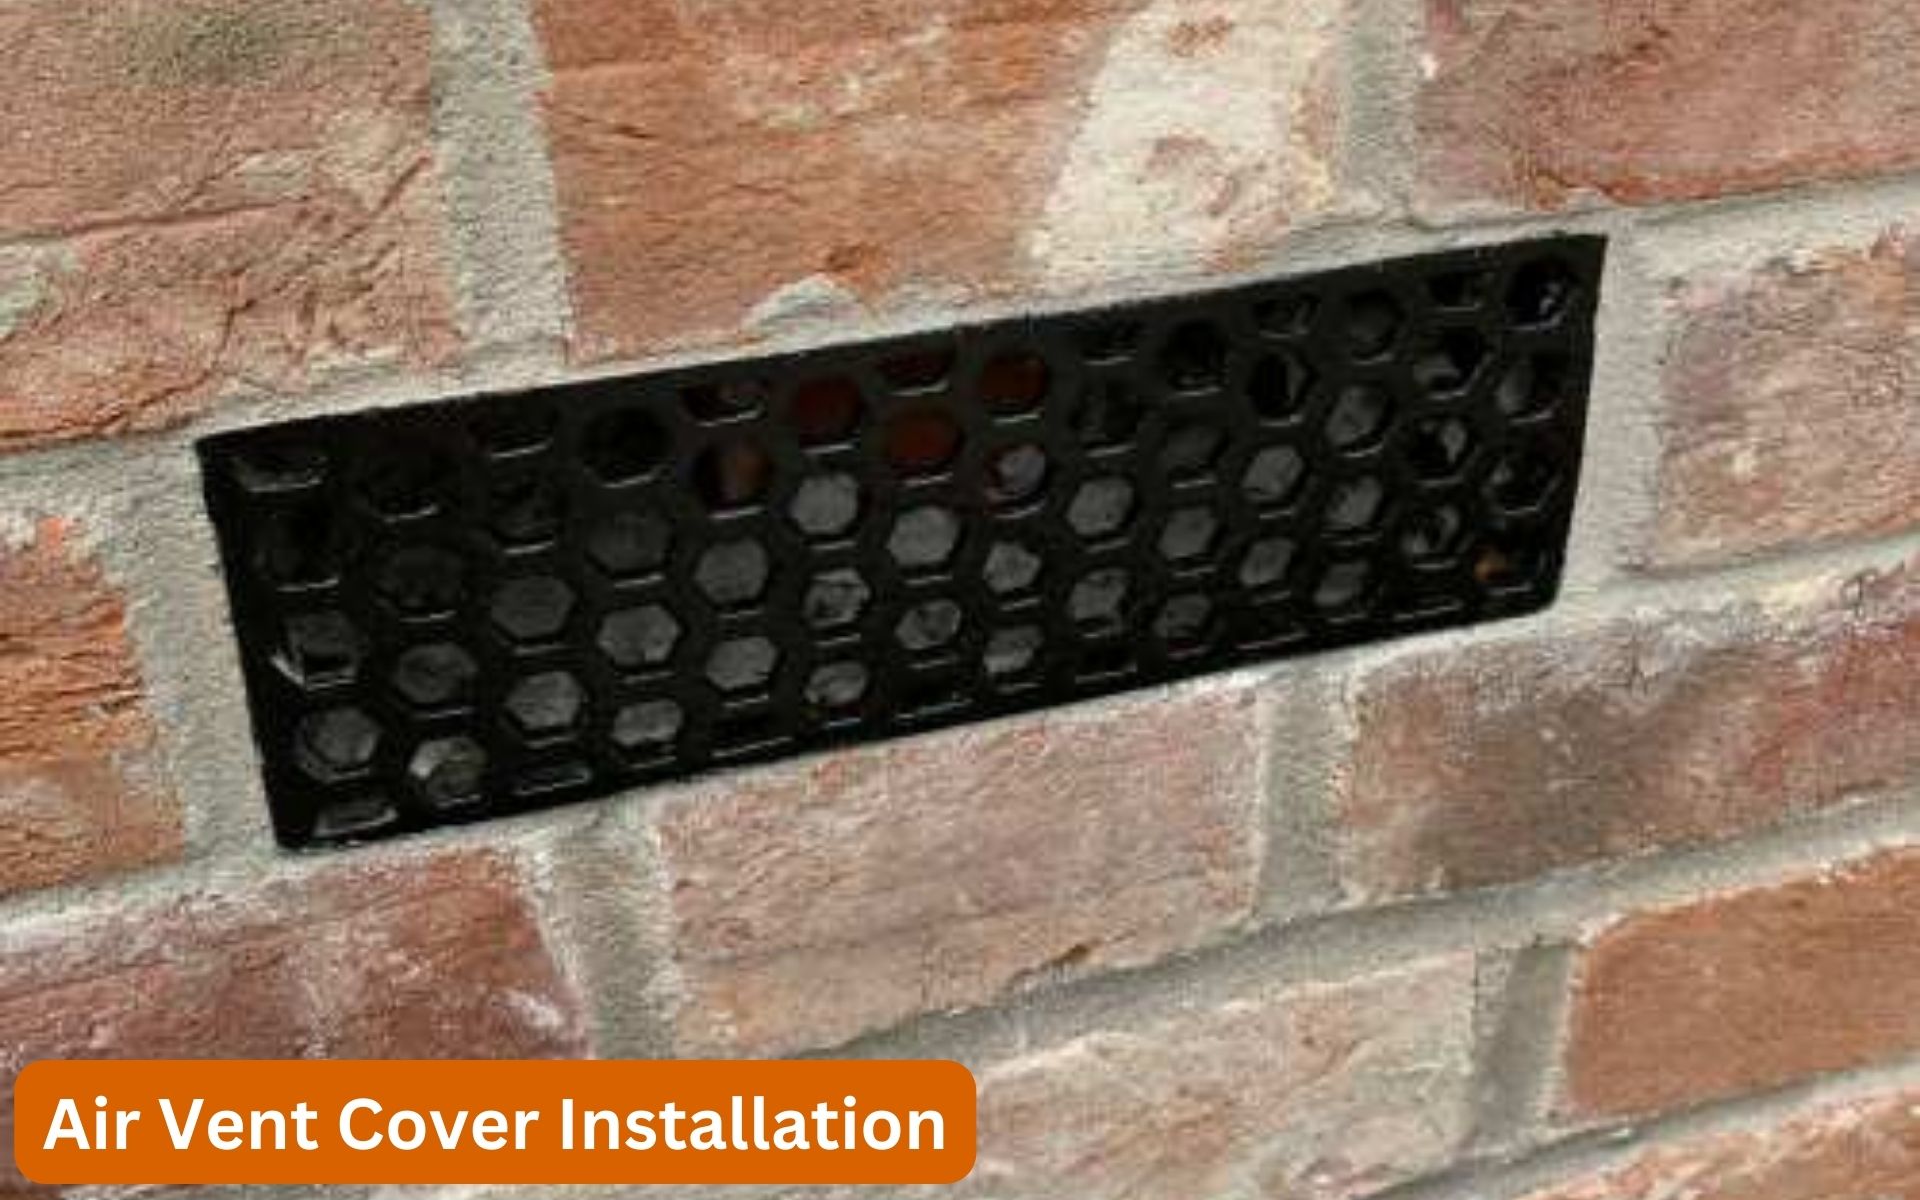 Air Vent Cover Installation